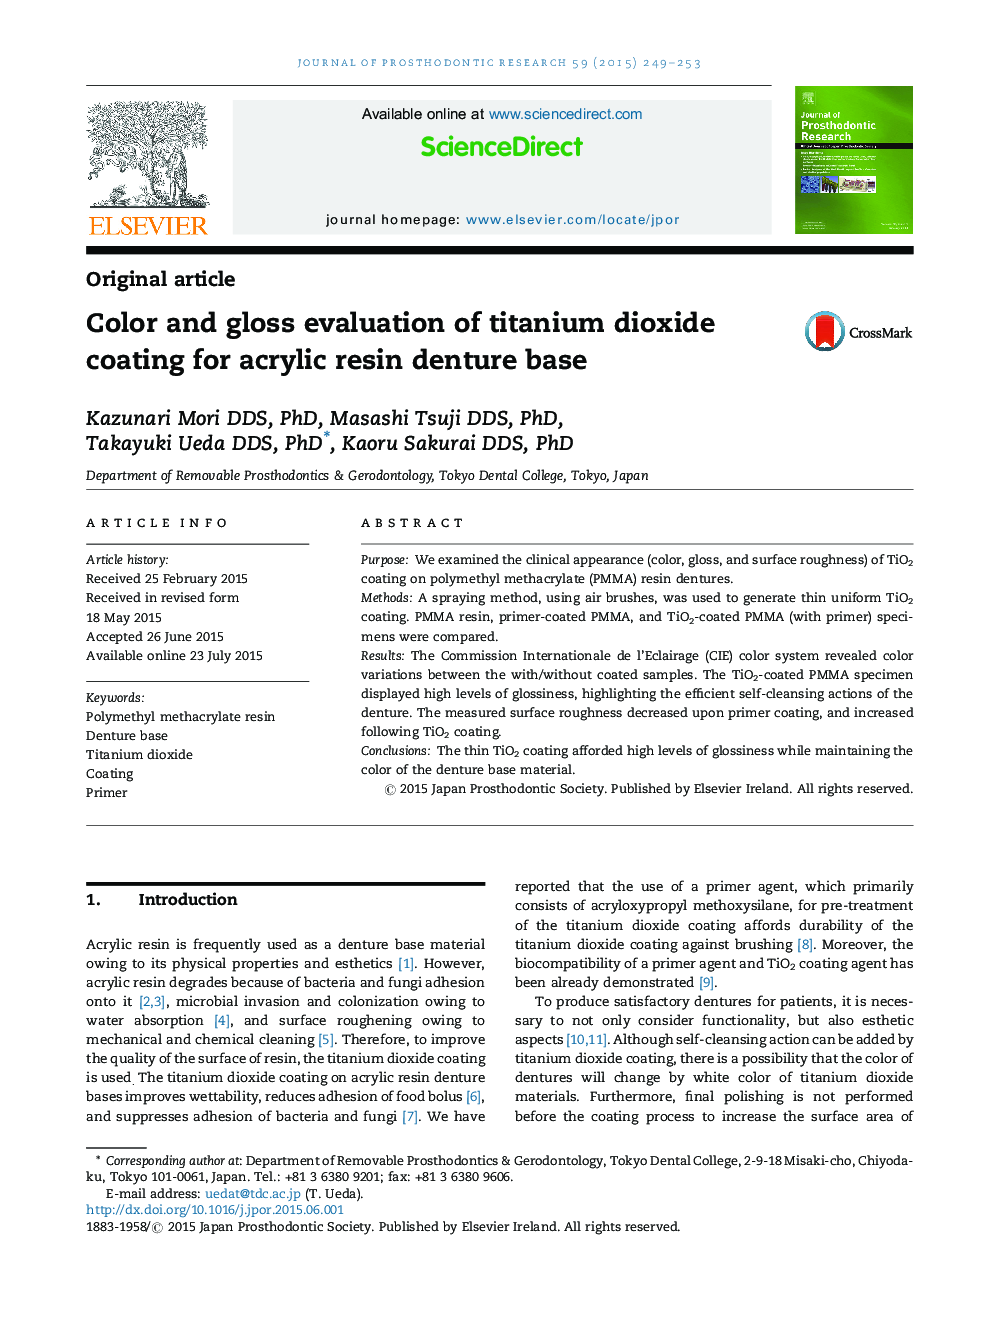 Color and gloss evaluation of titanium dioxide coating for acrylic resin denture base